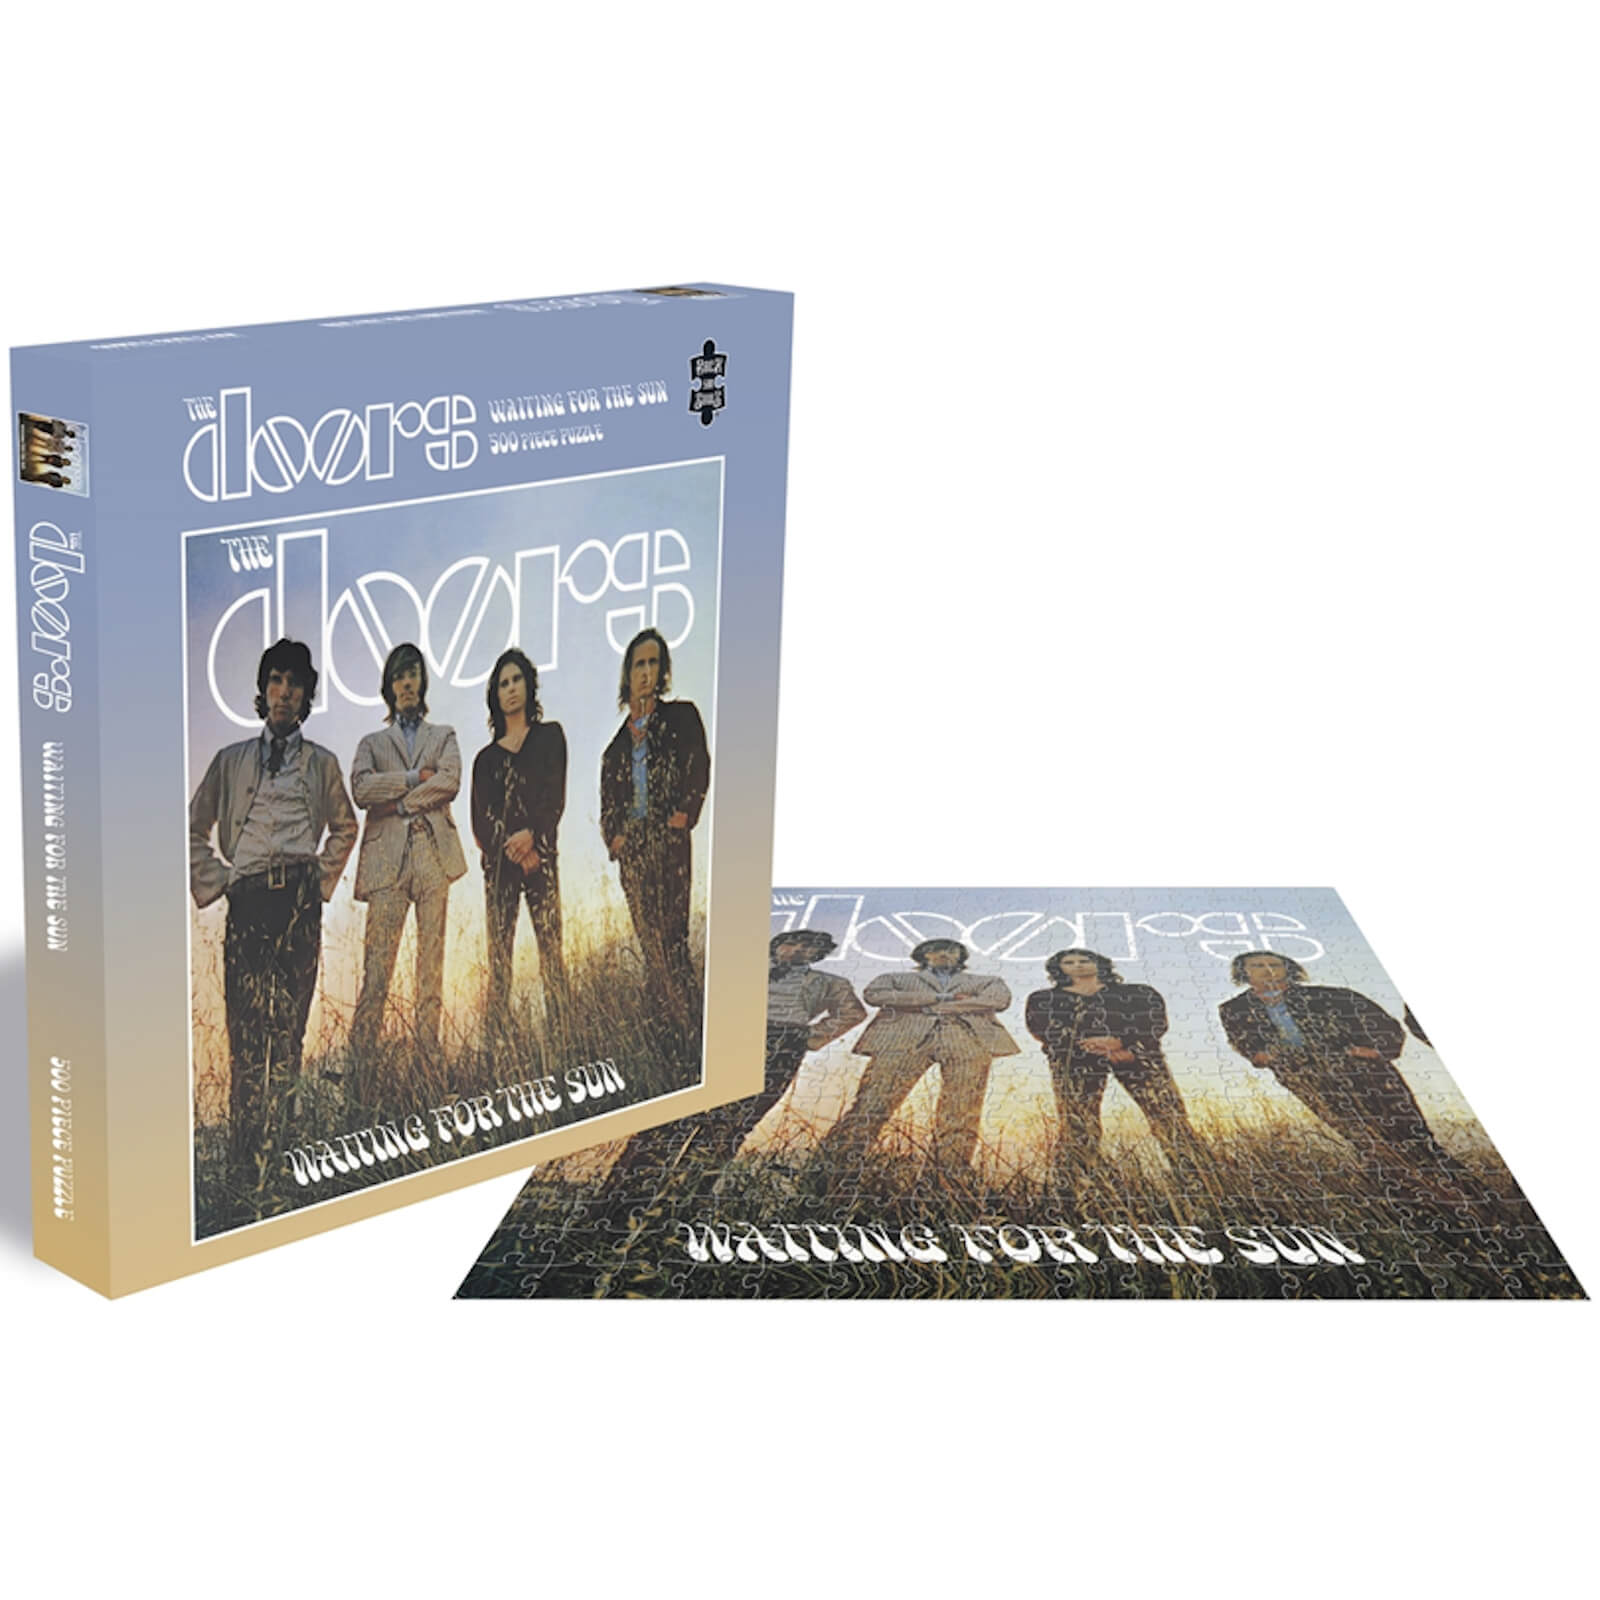 Photos - 3D Puzzle The Doors Waiting for the Sun  RSAW026PZ(500 Piece Jigsaw Puzzle)